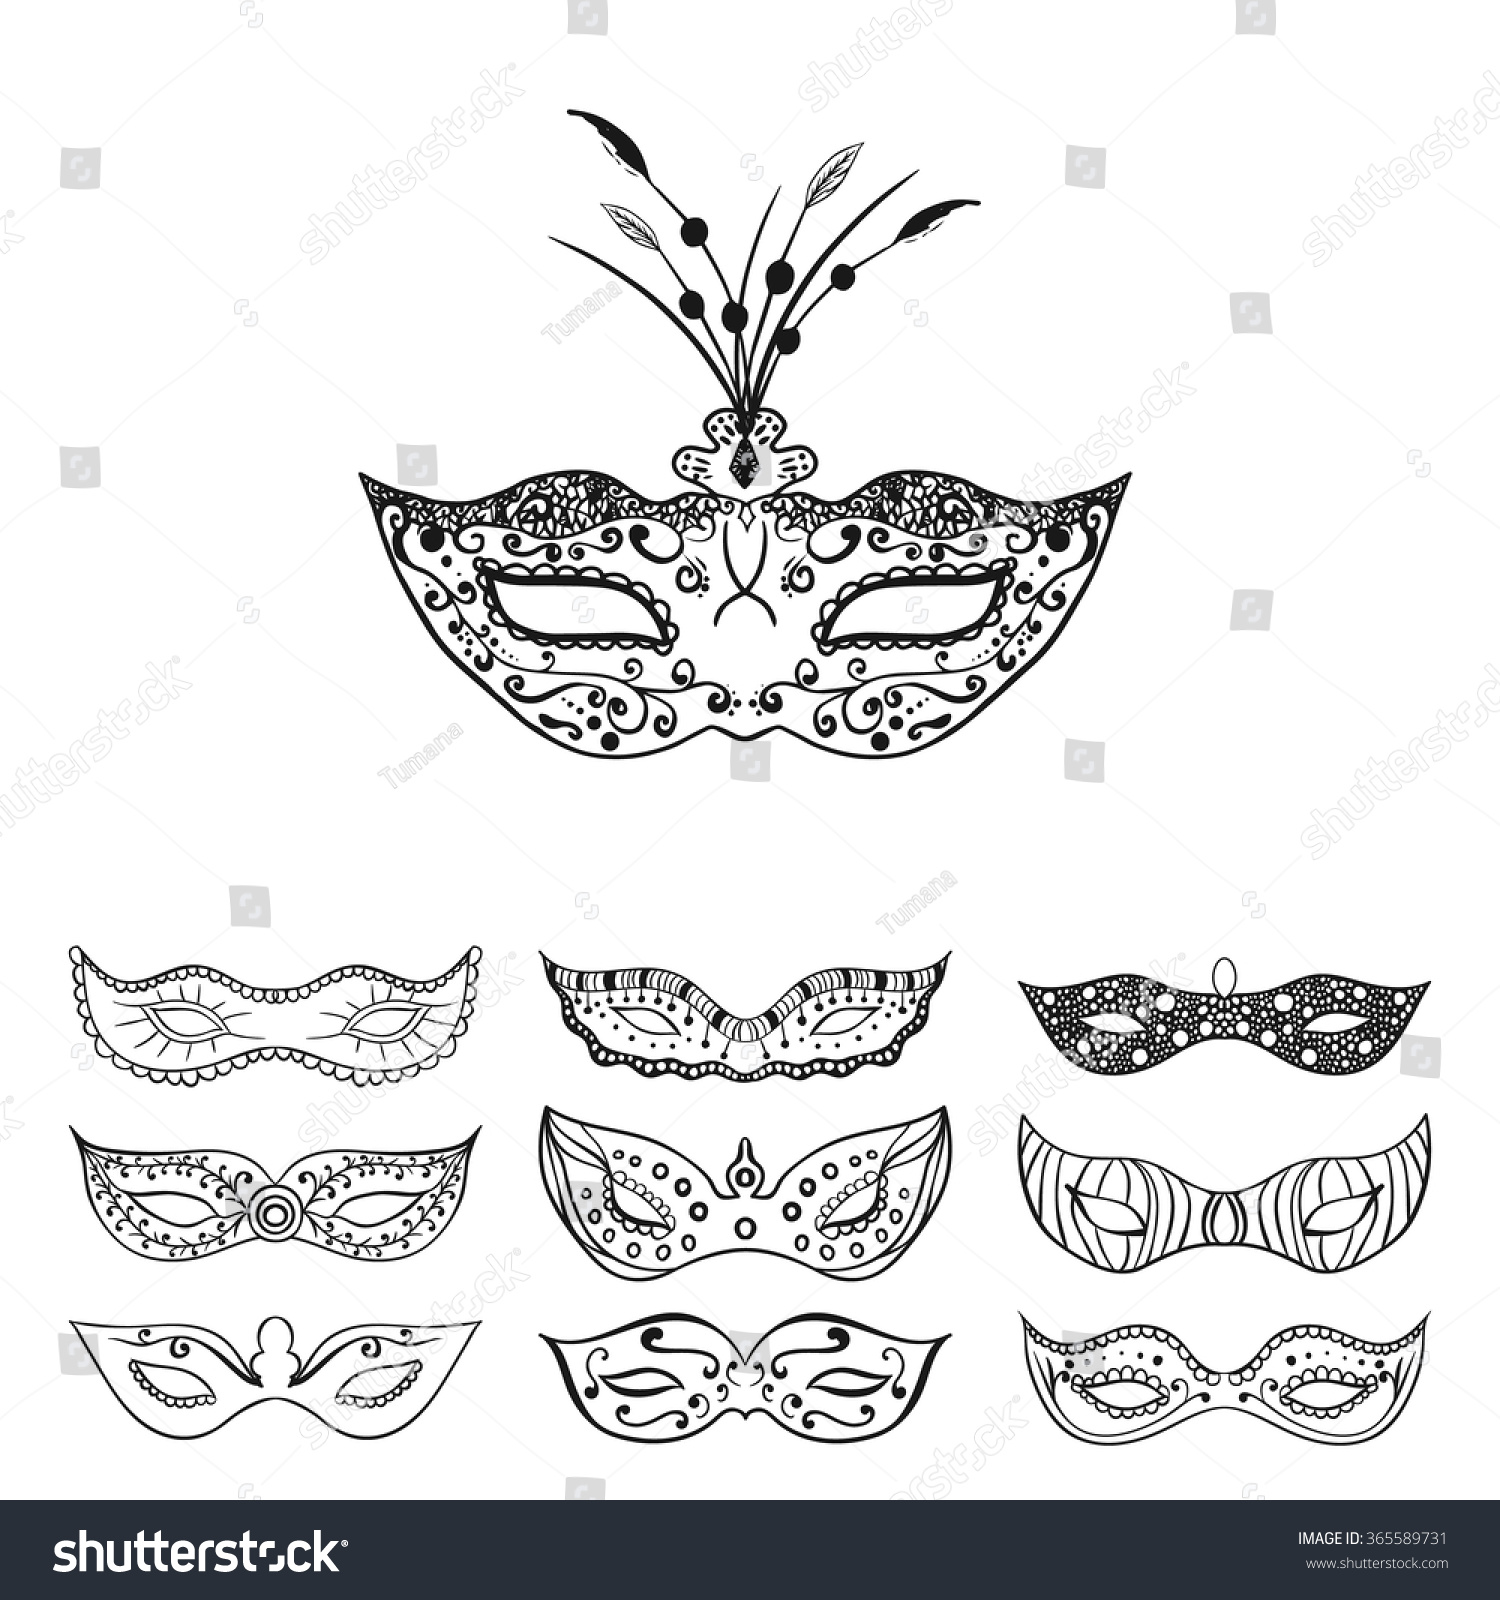 Set Of Isolated Festive Black Hand Drawn Mask Silhouette On The White ...